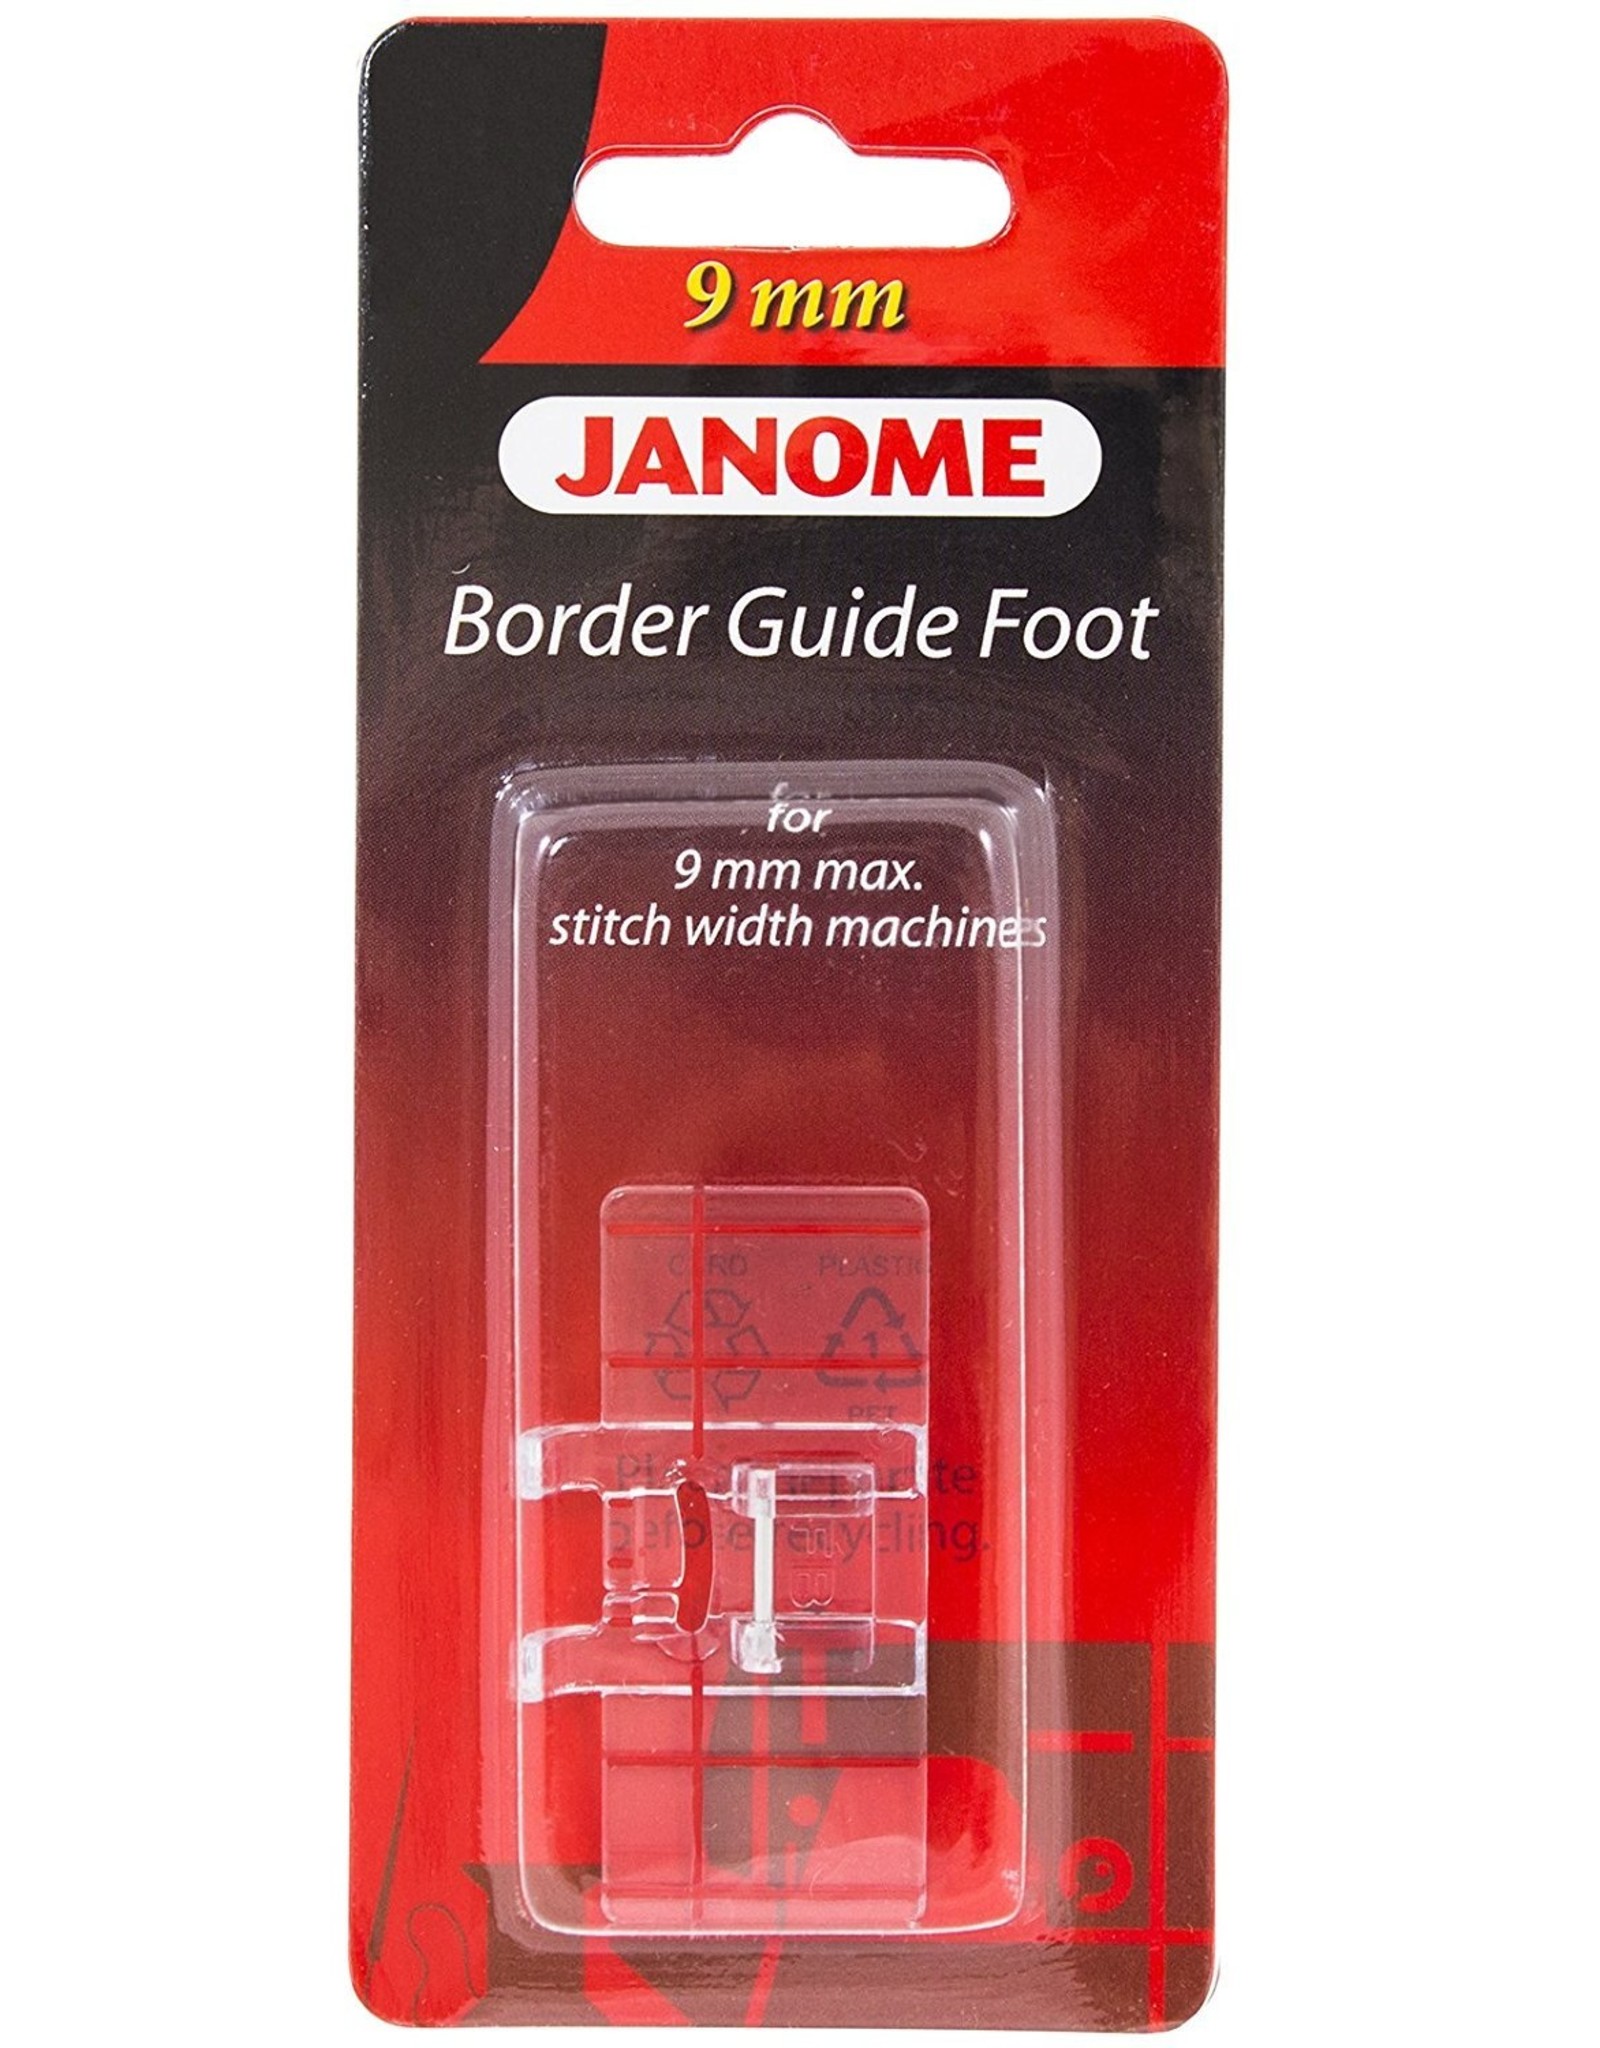 Janome Border Guide Foot 9mm- 202084000